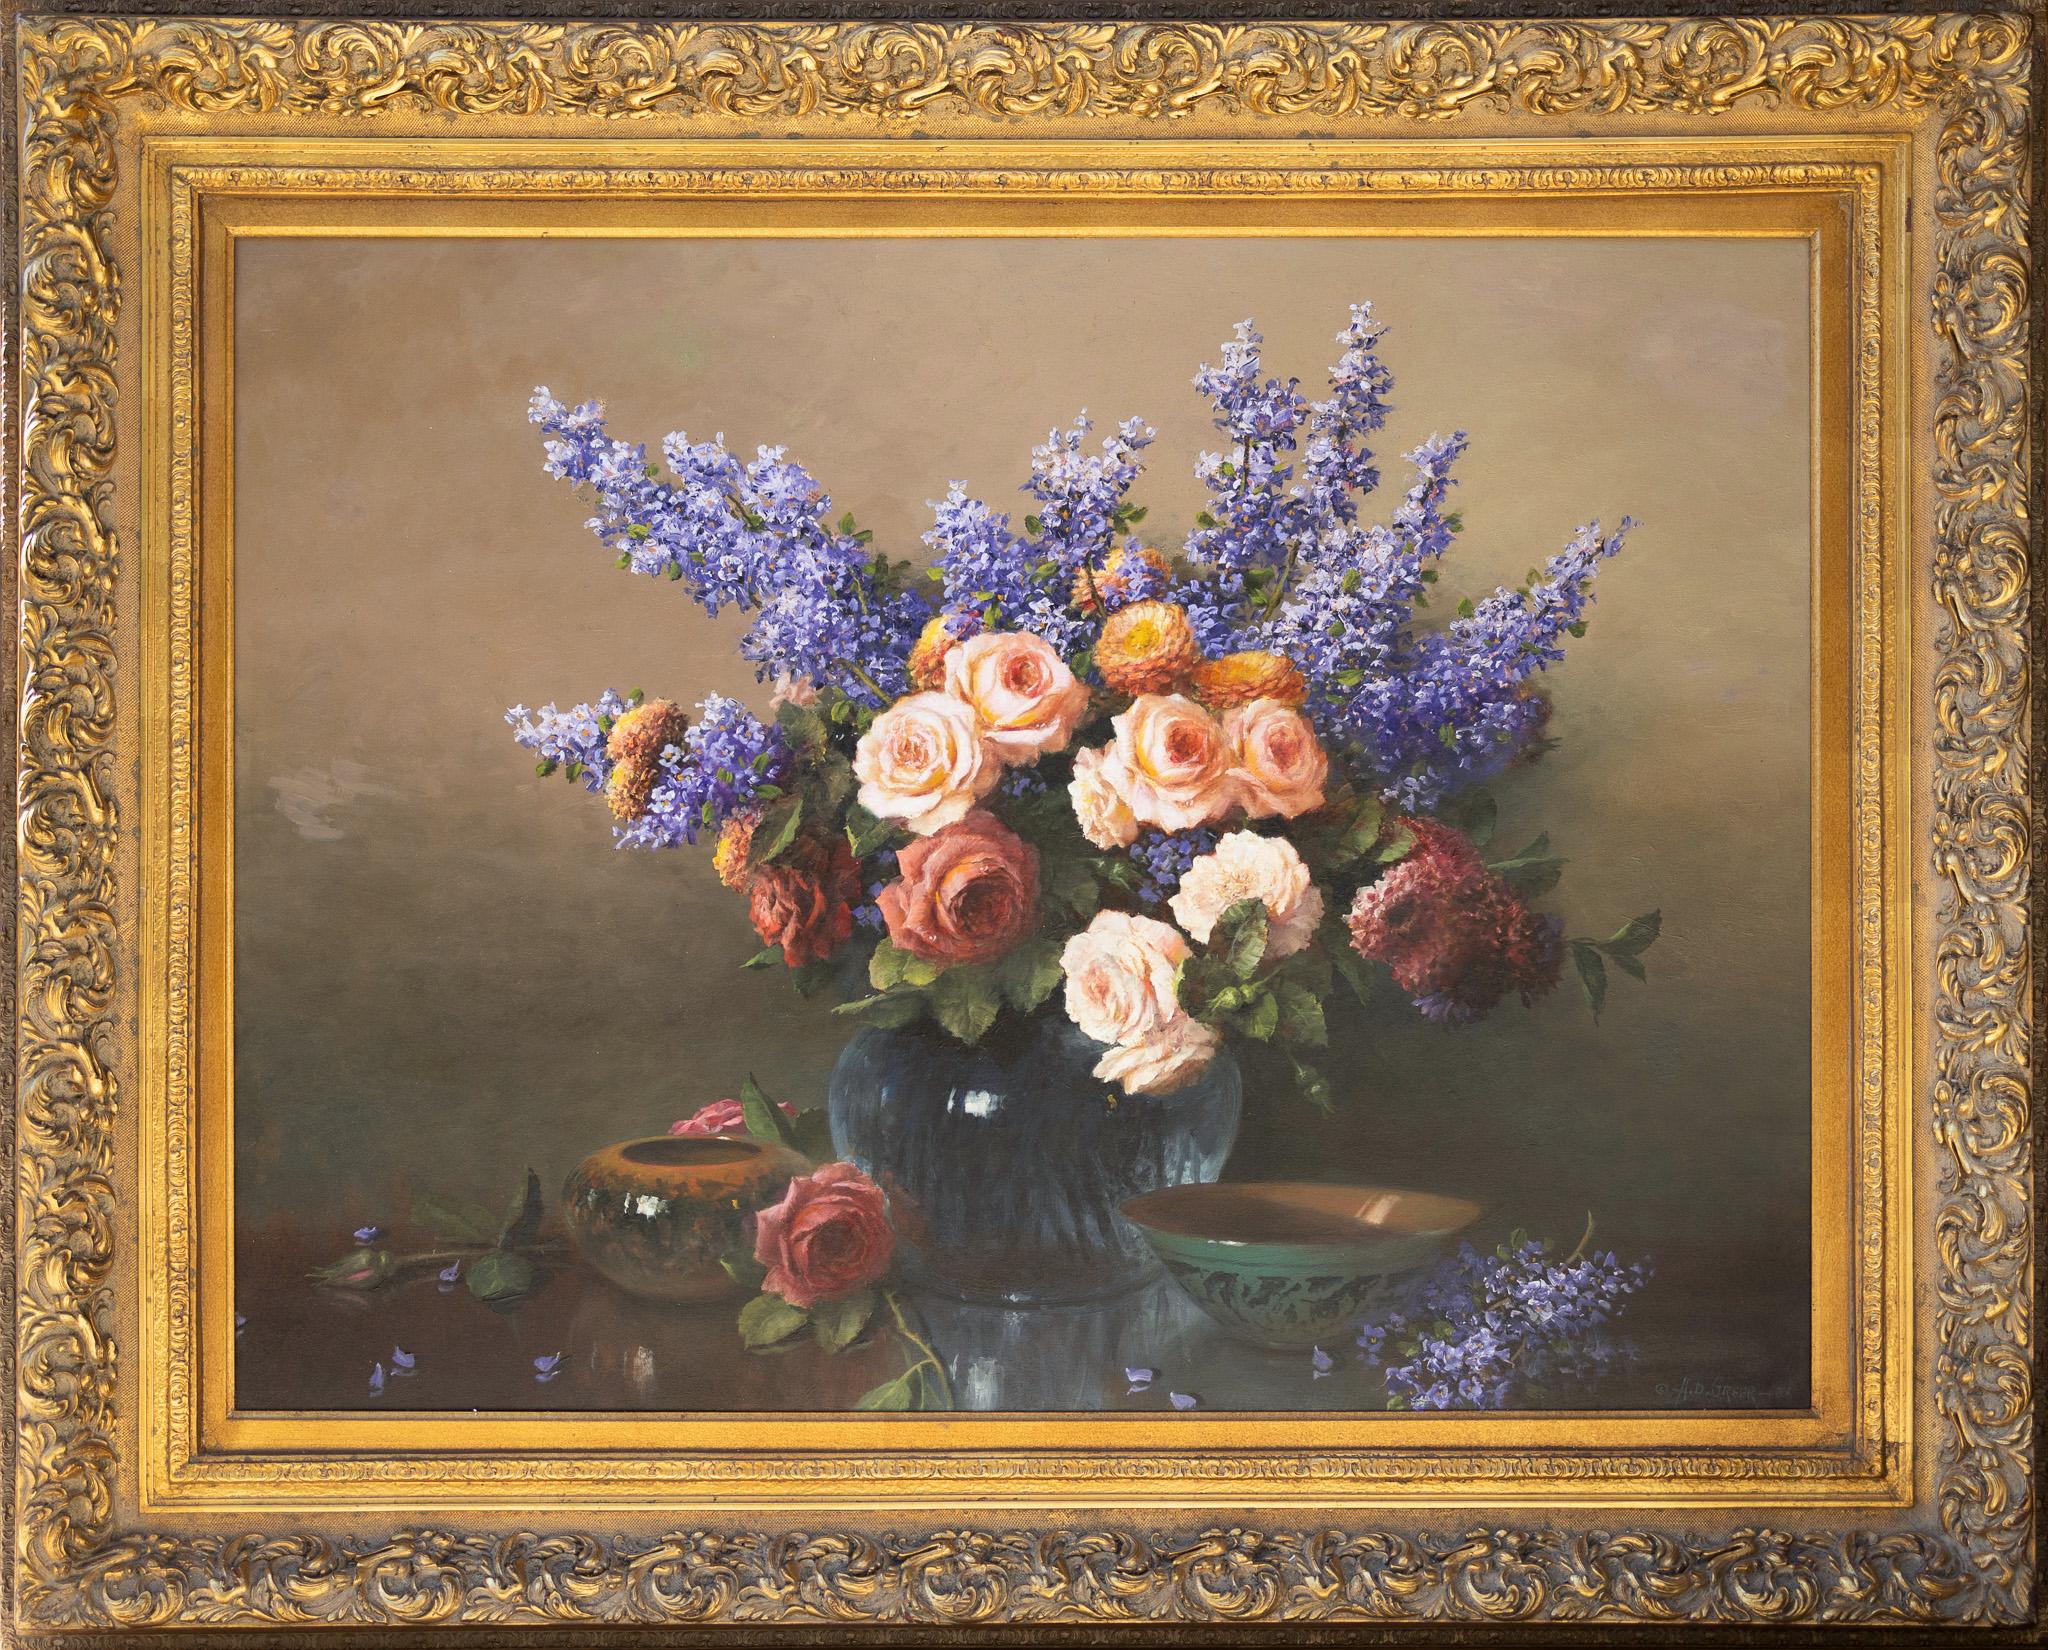 Floral Still Life with Roses, Lilacs, and Zinnias - American Realist Painting by A.D. Greer